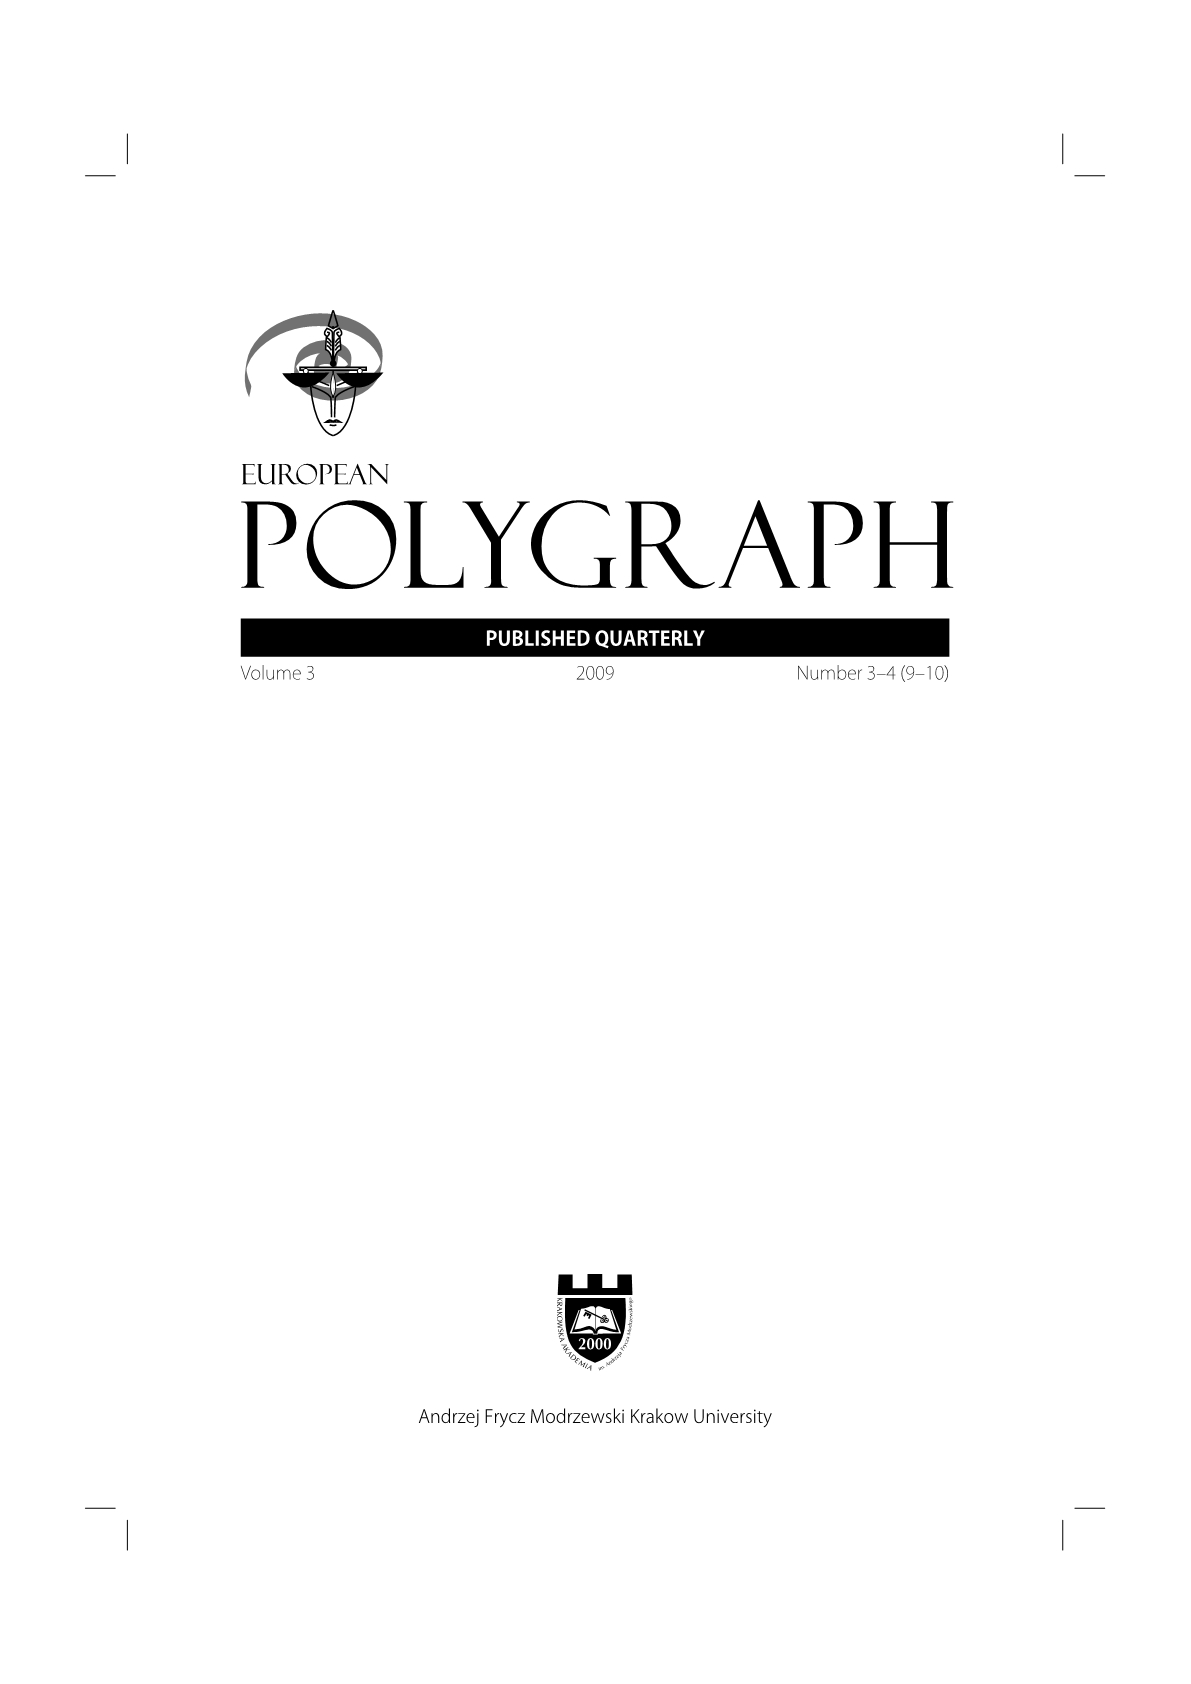 Influence of case facts on blind scorers of polygraph tests